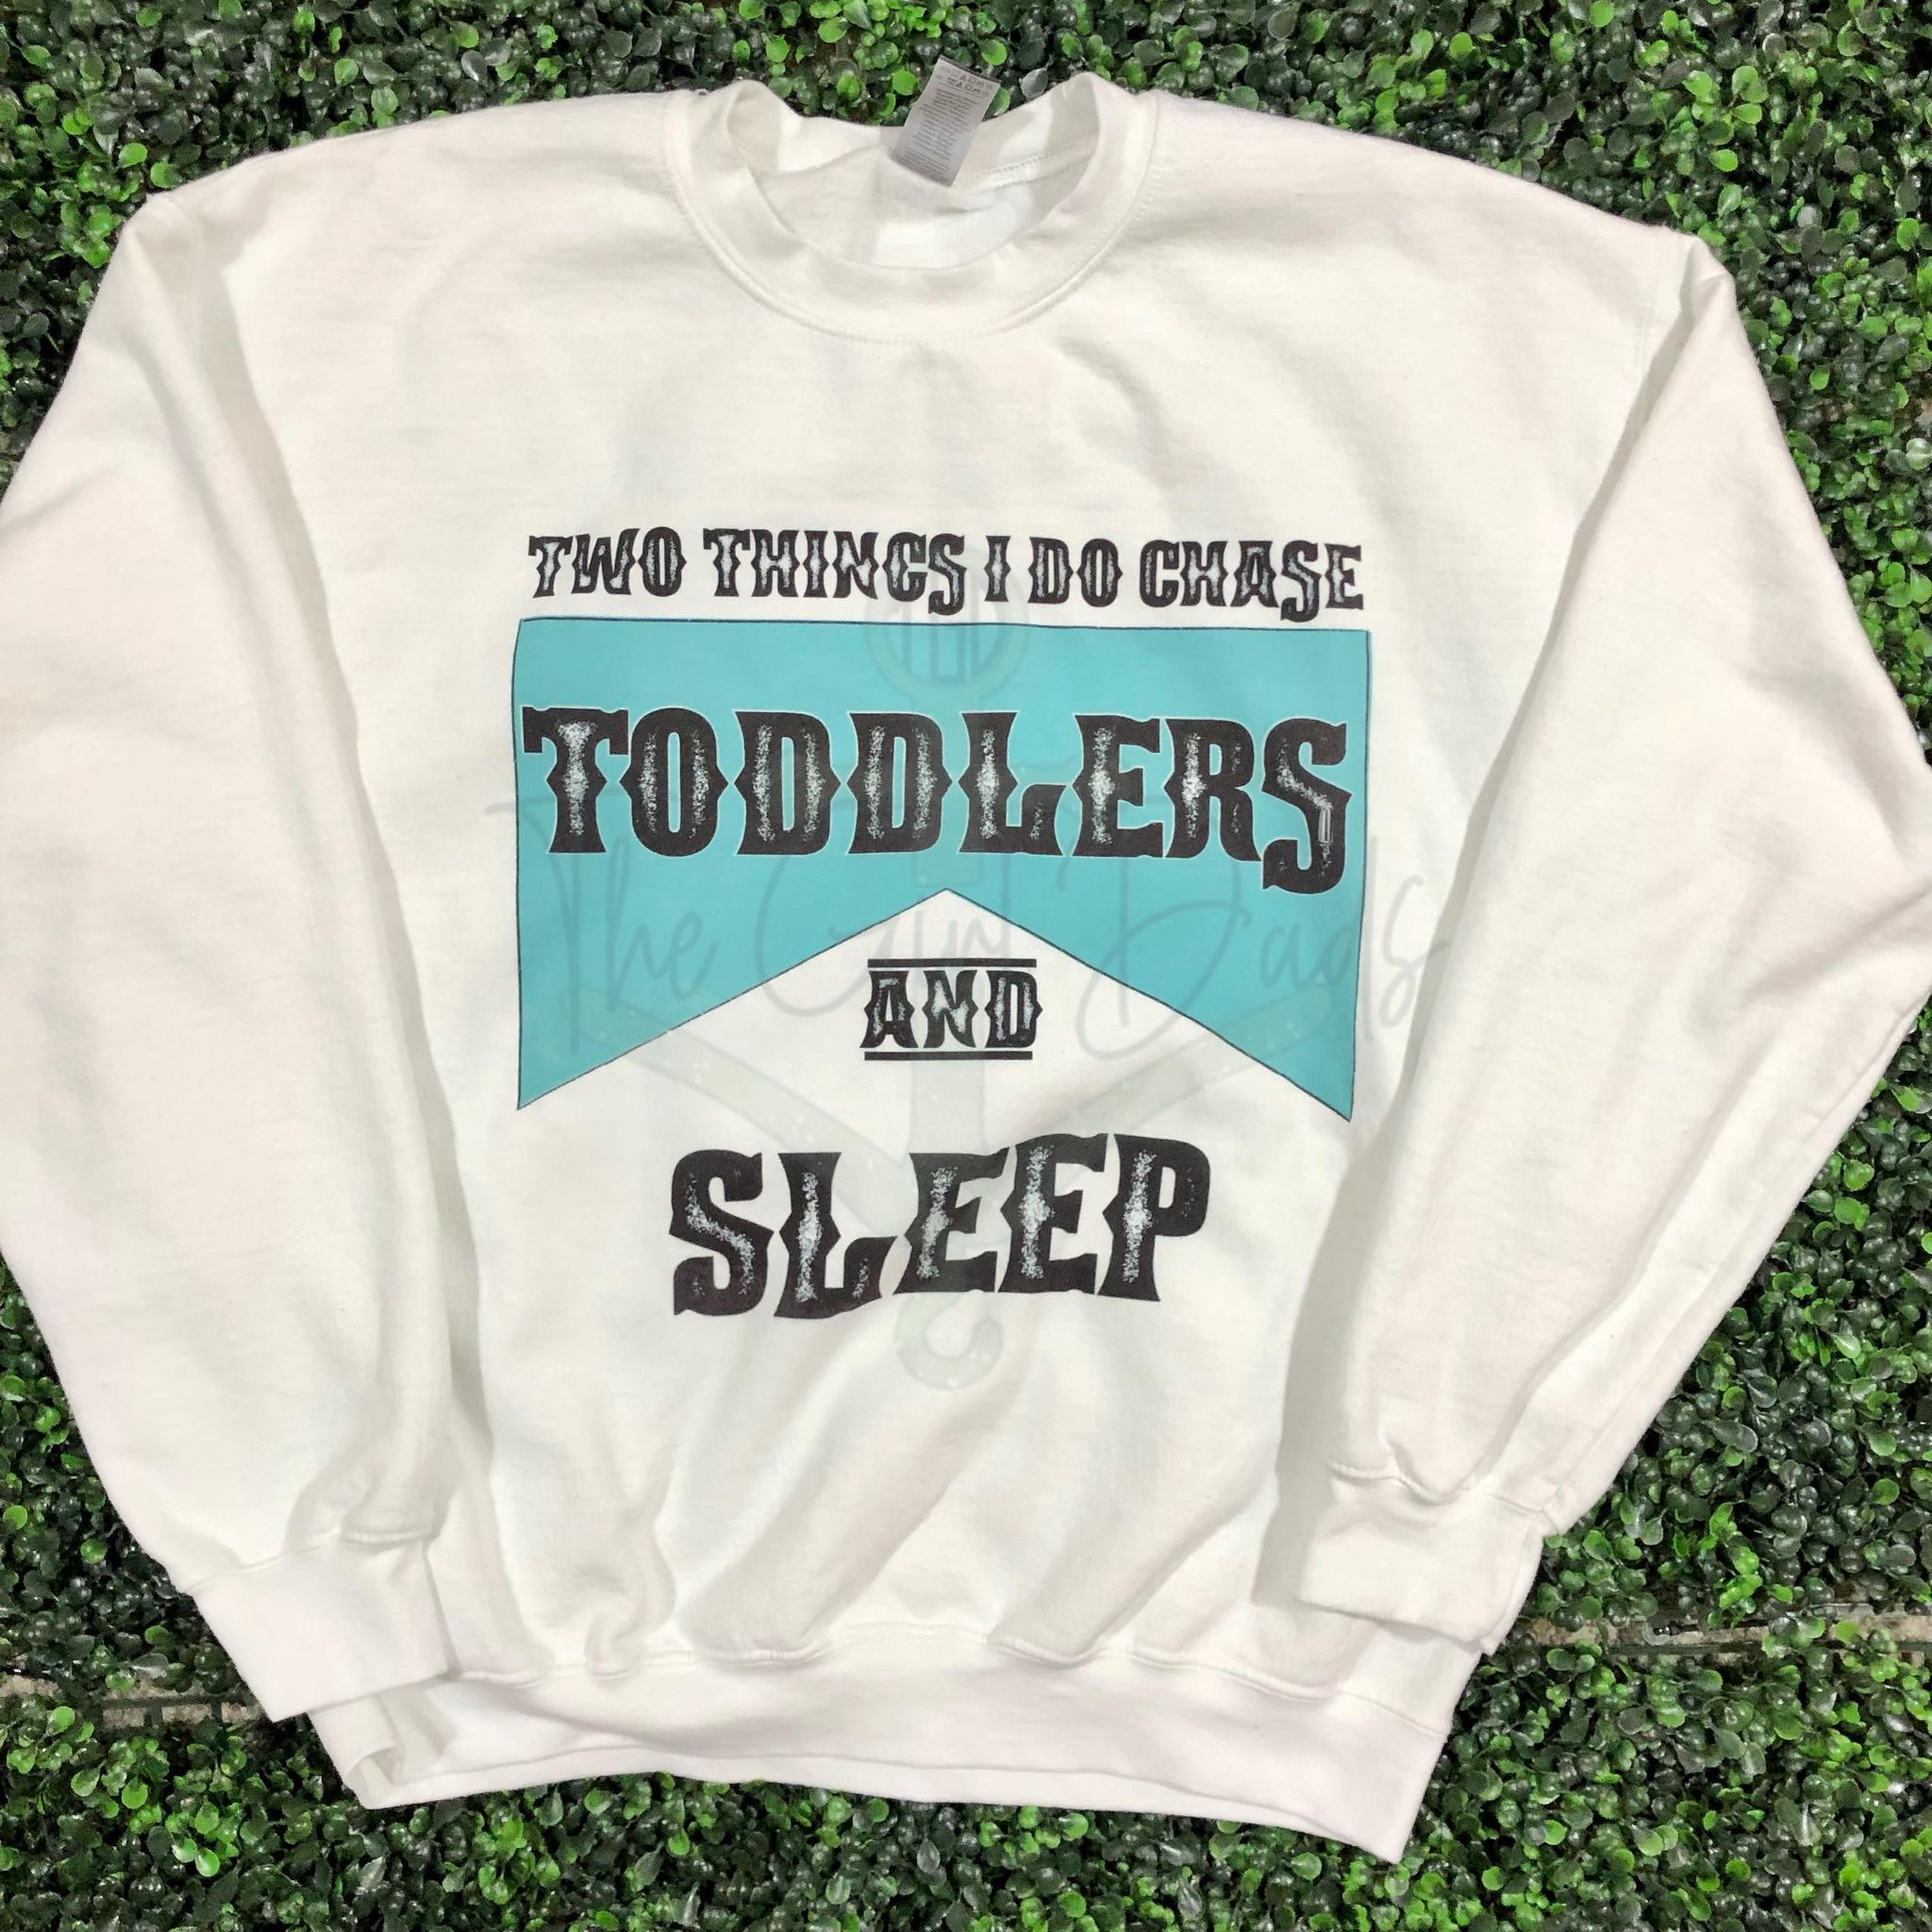 Chase Toddlers and Sleep Top Design